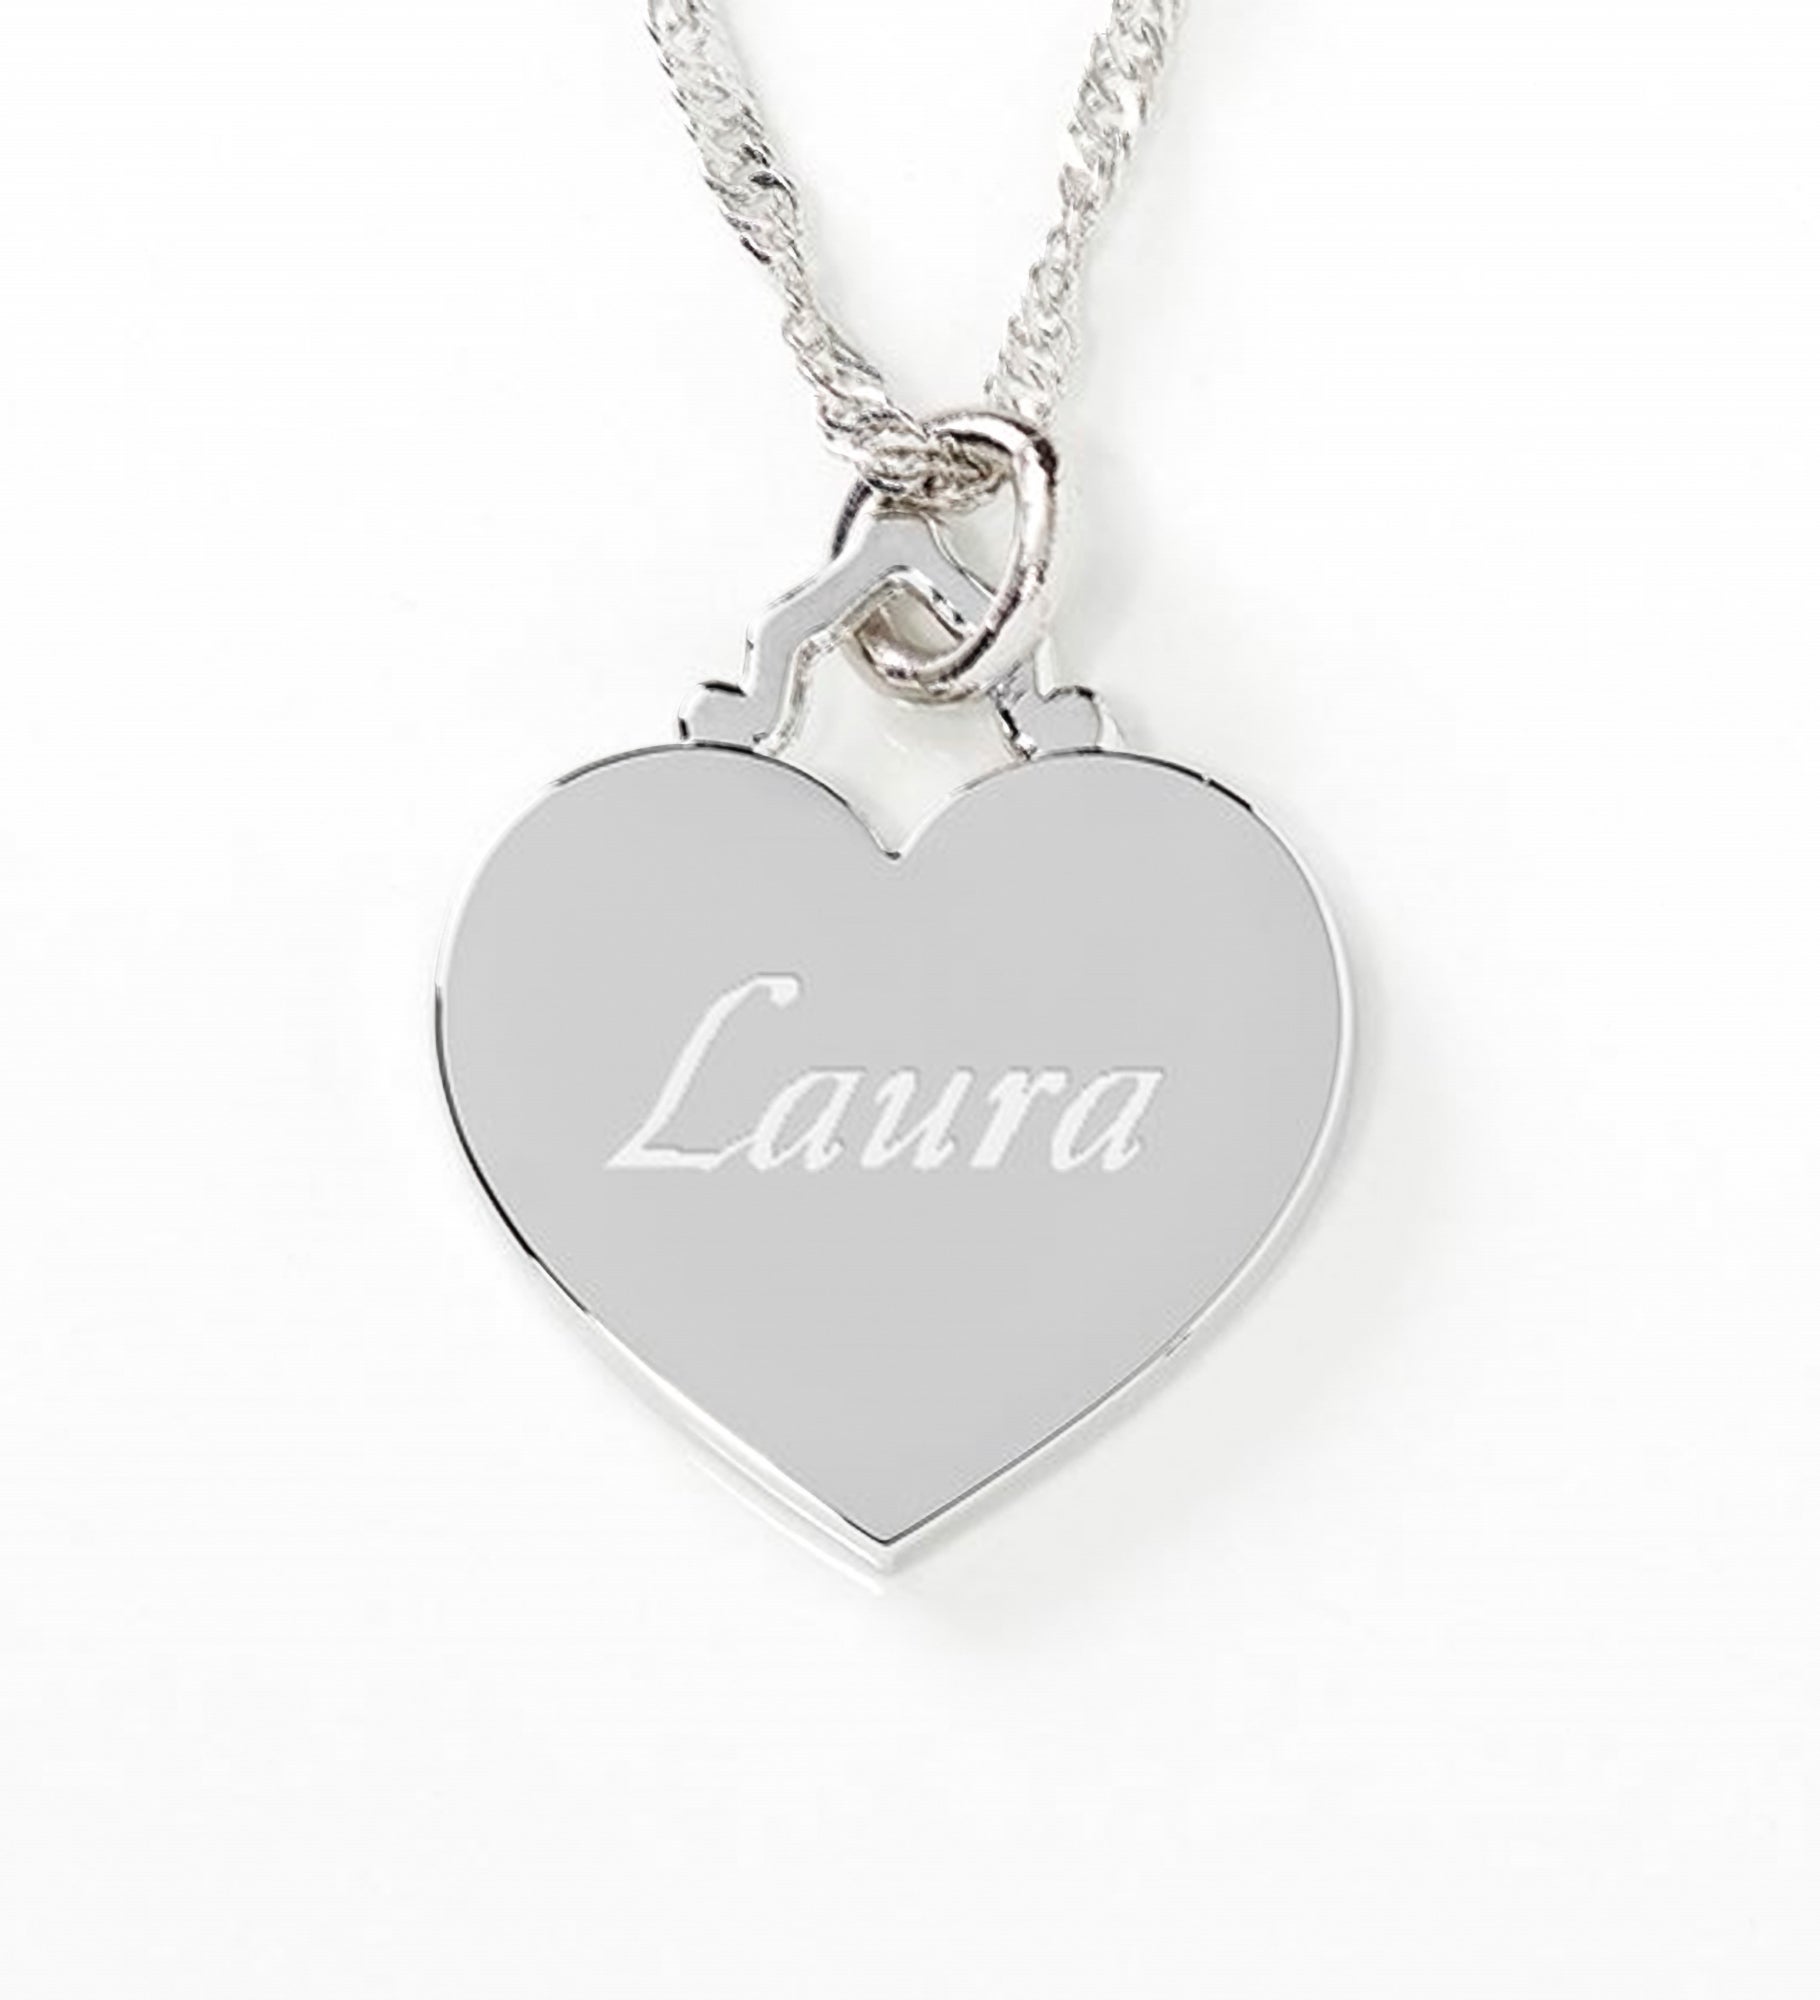 Just For Her Personalized Heart Pendant